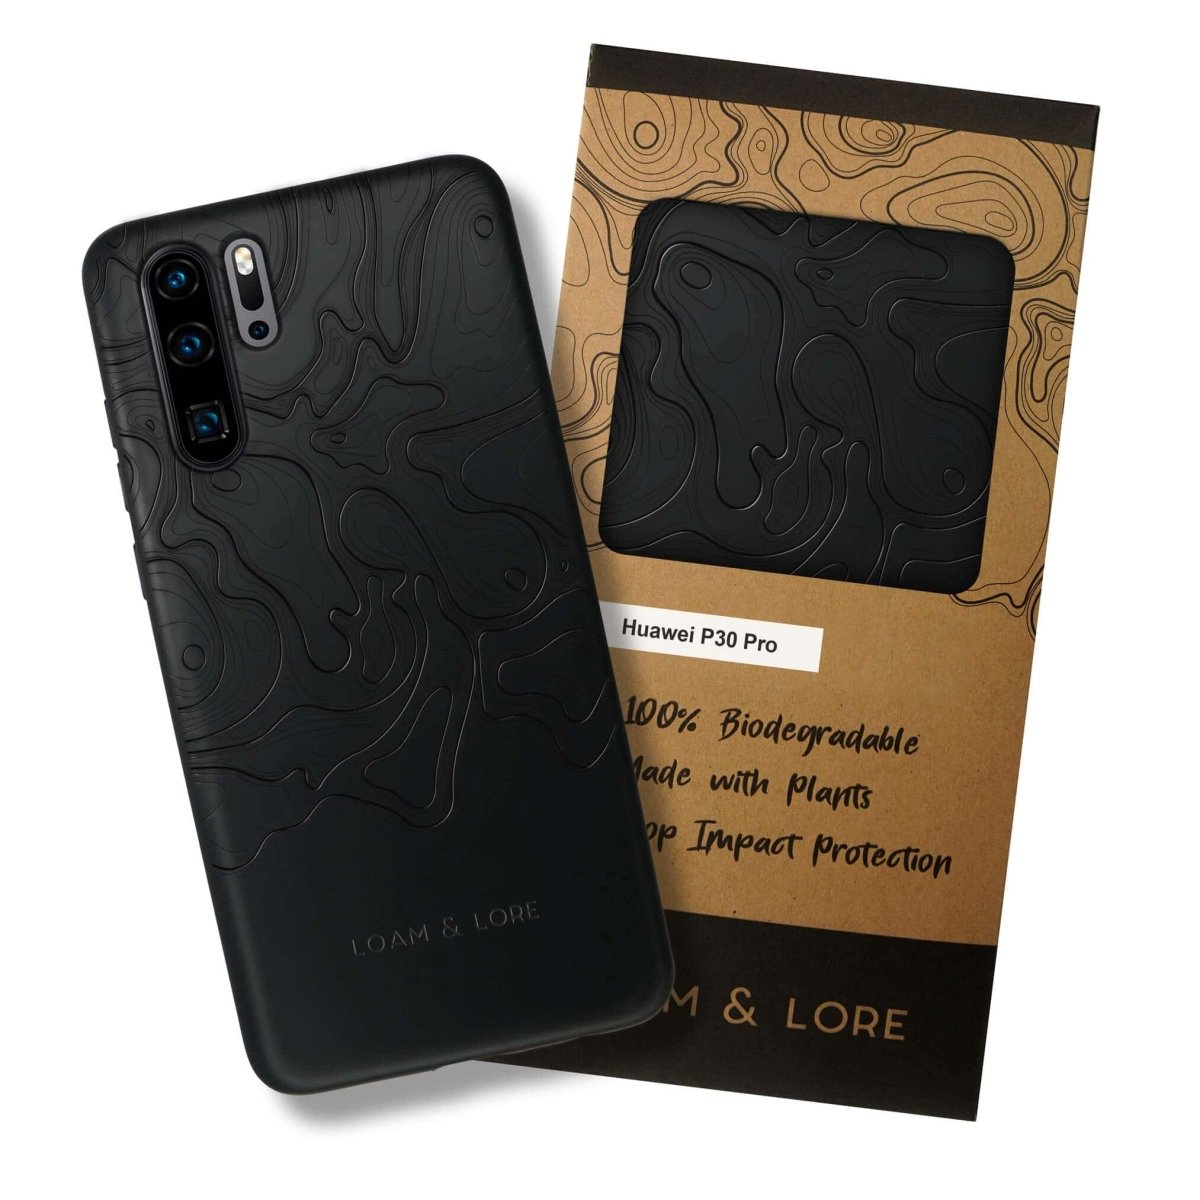 Huawei P30 Pro Eco Friendly Phone Case Compostable & Biodegradable - Loam & Lore